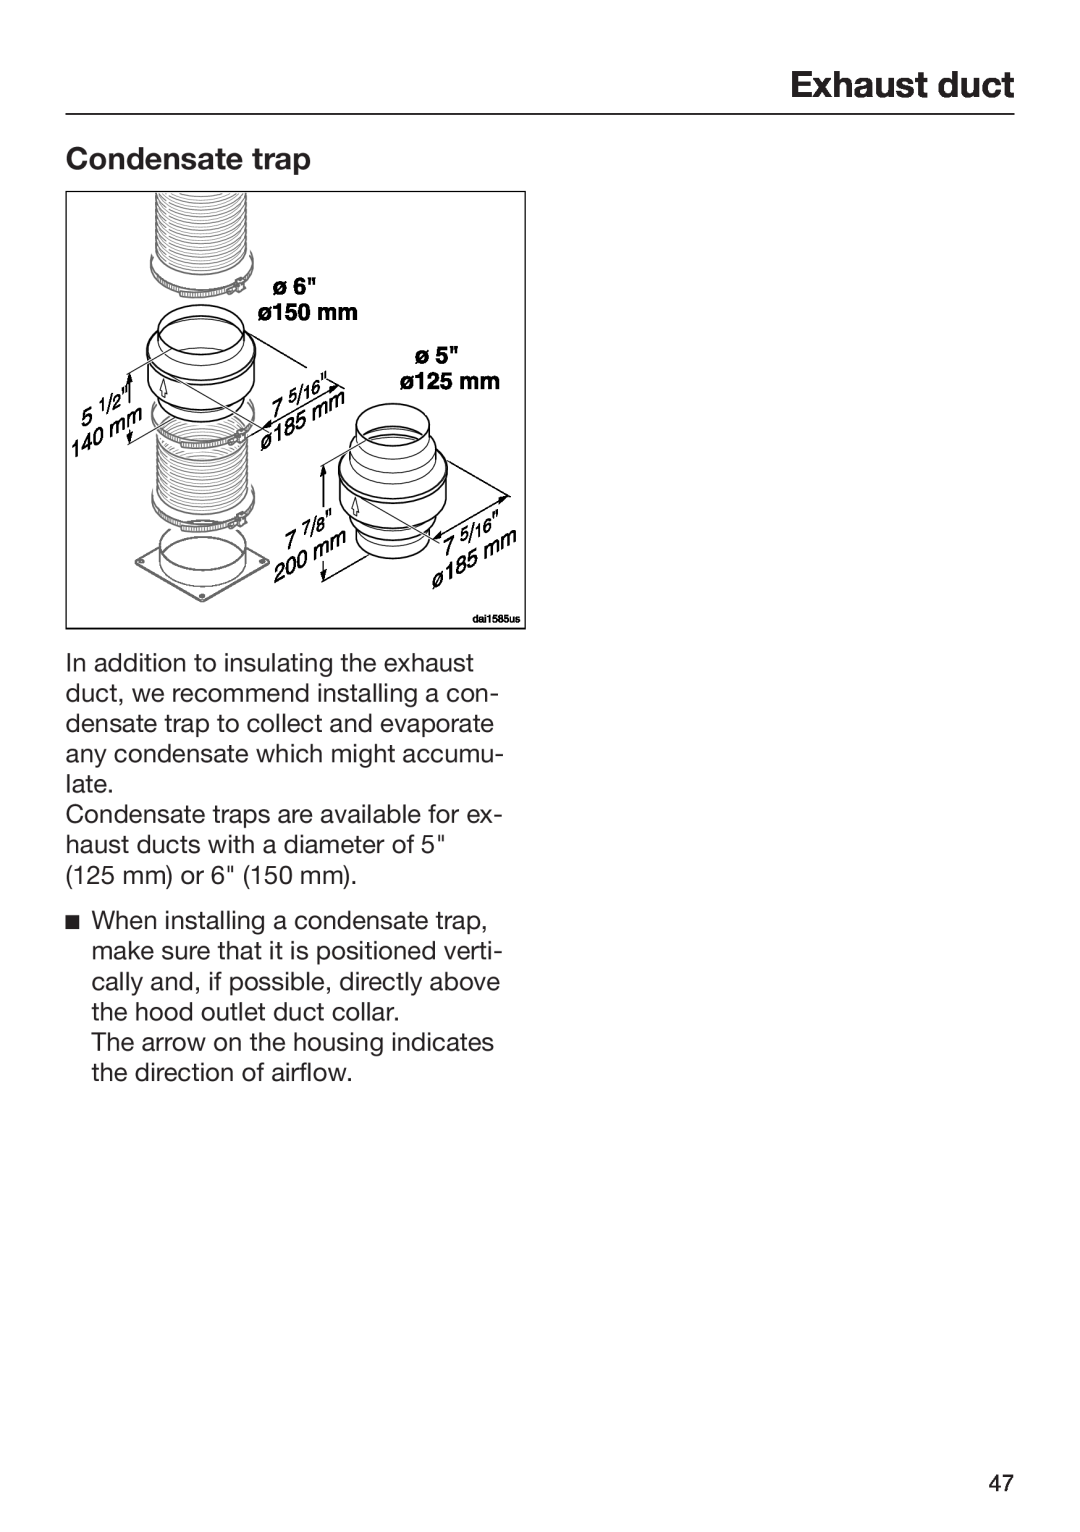 Miele M.-Nr. 09 805 980 installation instructions Condensate trap, Exhaust duct 